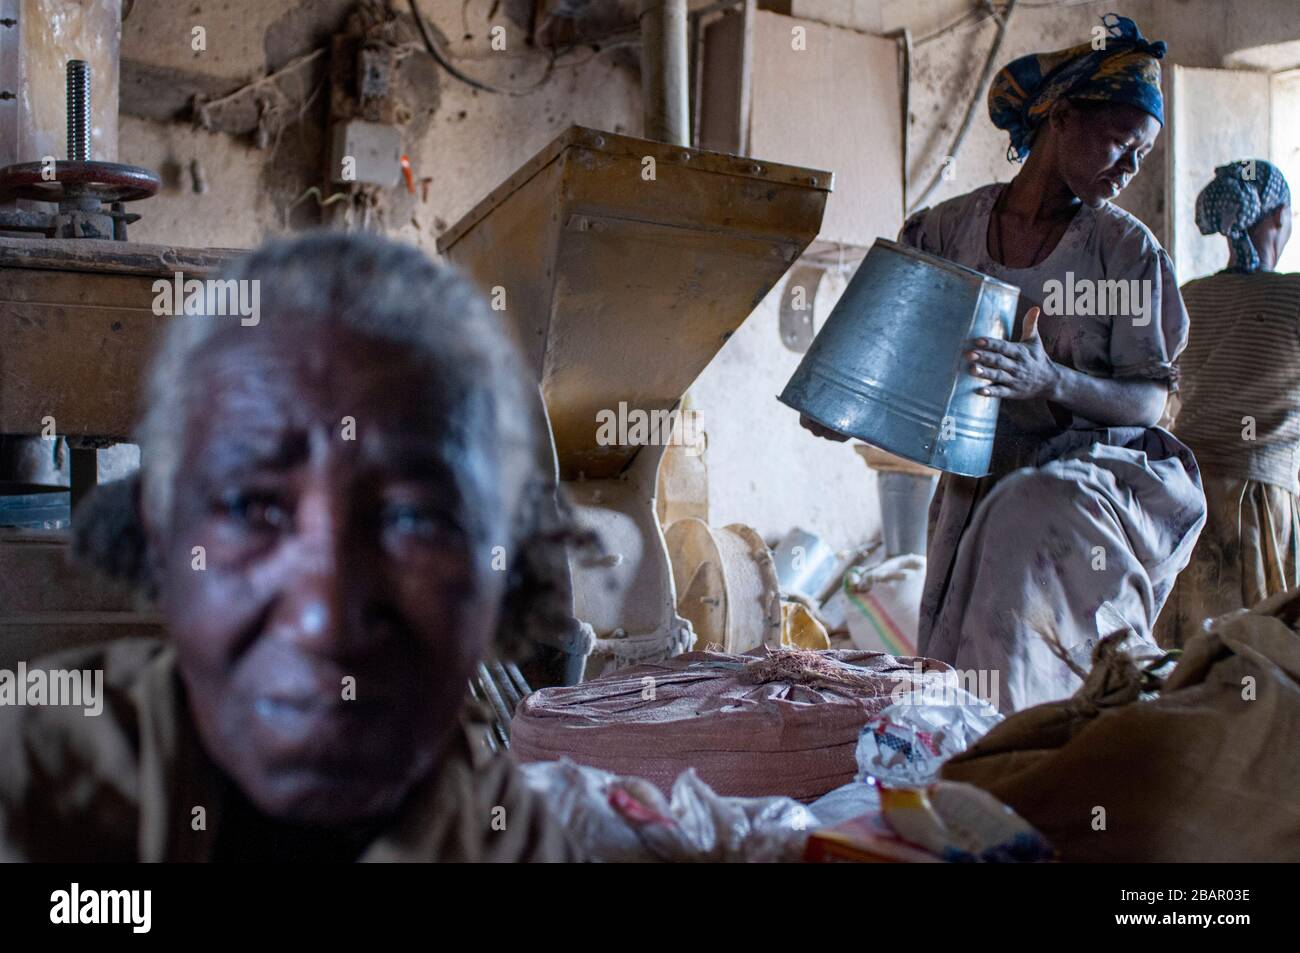 Adwa village or Adua Tigray Region, Ethiopia. Some women sift through cereal grains in the village of Atwa. Teff, the cereal from Ethiopia. The teff i Stock Photo